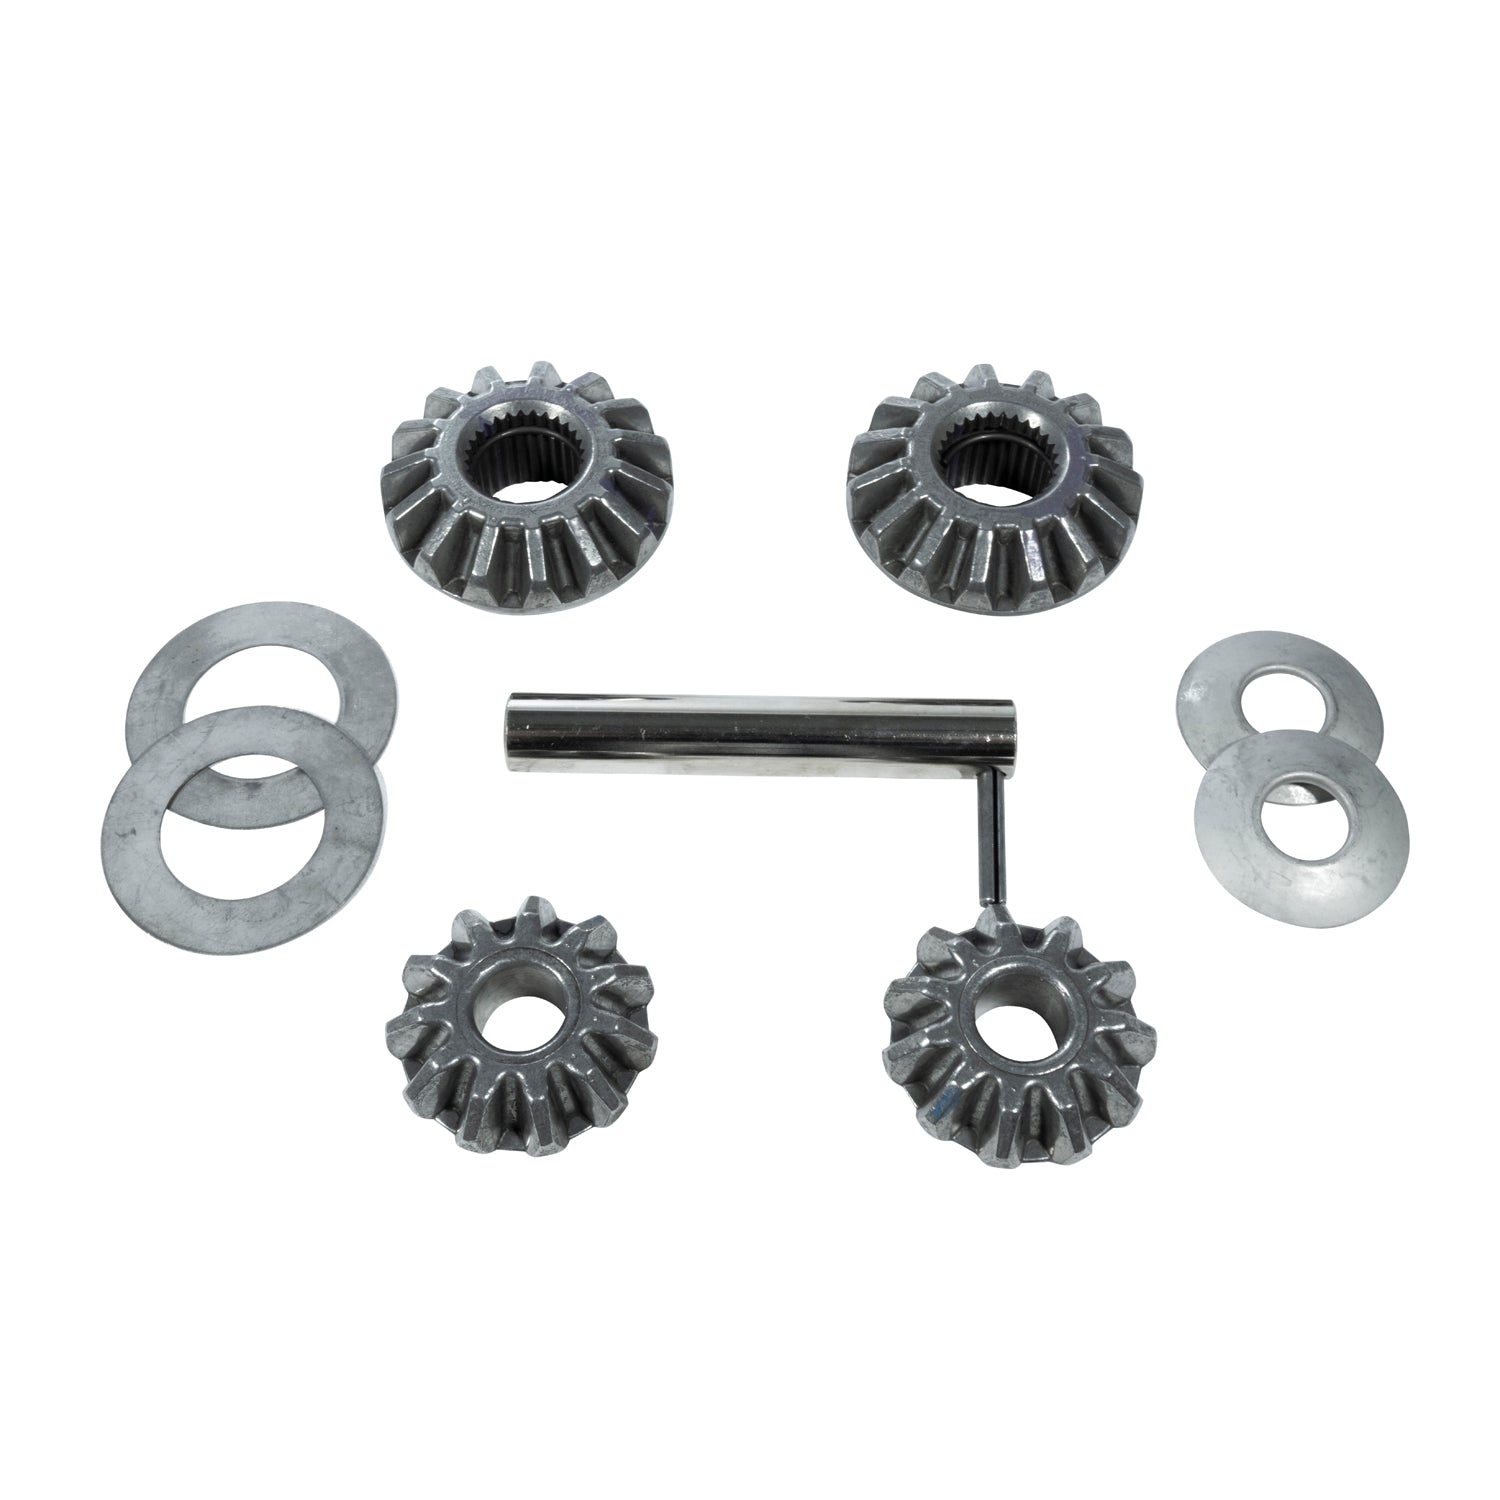 Yukon Gear Cadillac Chevrolet GMC (4WD/AWD) Differential Carrier Gear Kit - Front Axle YPKGM8.25IFS-S